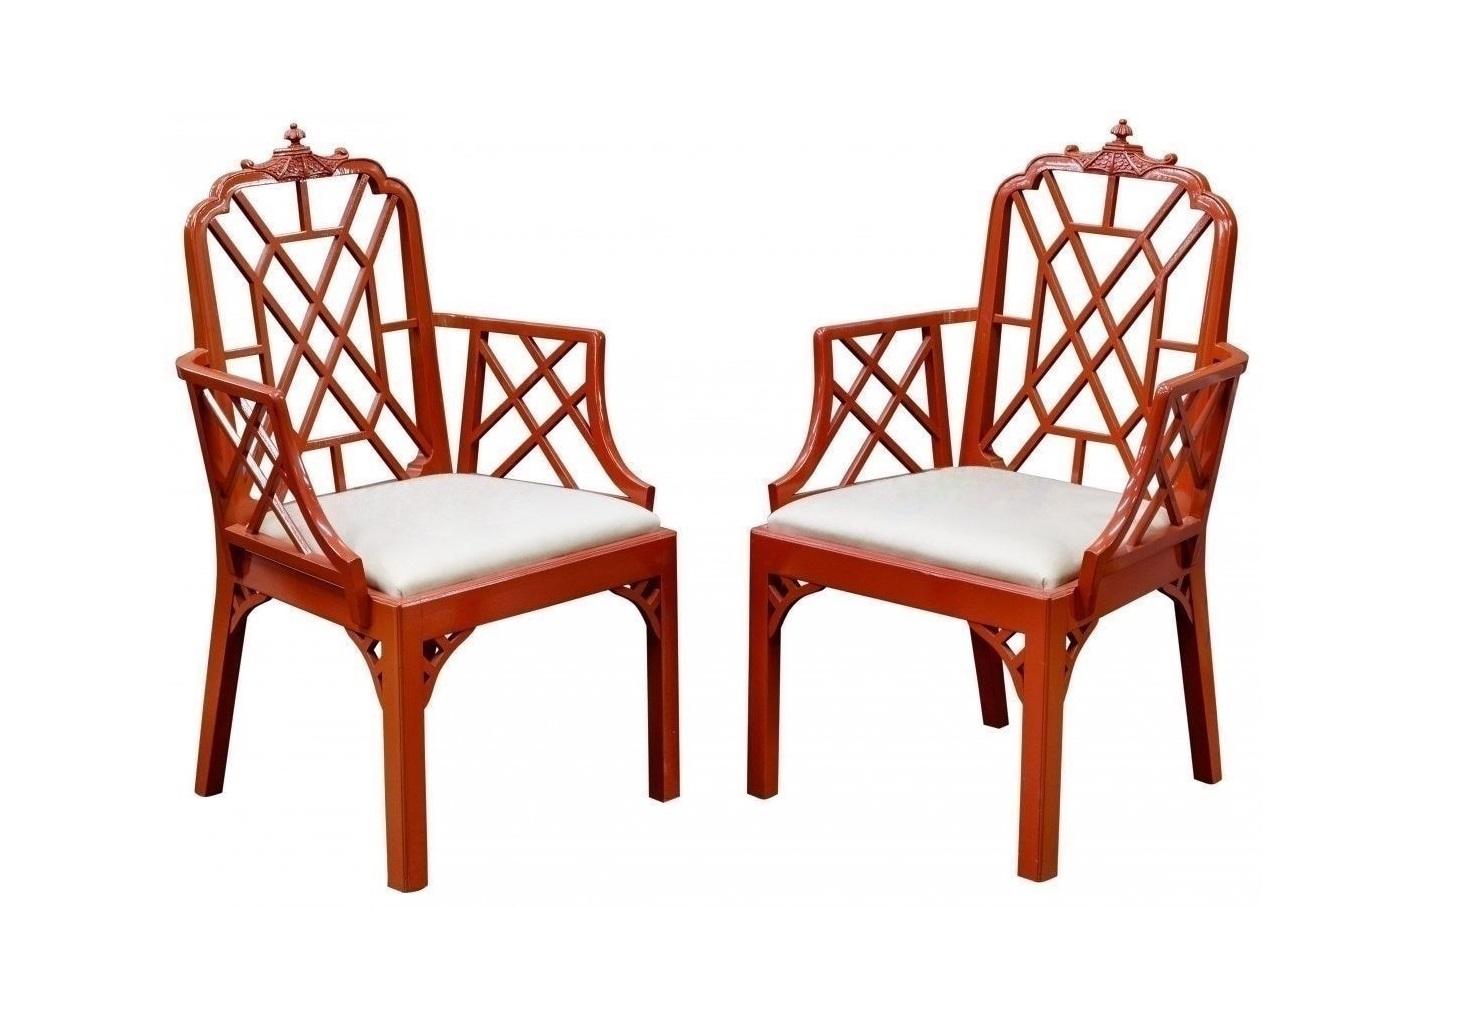 Beautiful set of 6 vintage Chinese Chippendale chinoiserie Pagoda dining chairs. This set includes 2-arm and 4 side chairs. The frames newly professionally finished in a reddish salmon lacquer, new upholstery and new foam as well. Featuring pagoda